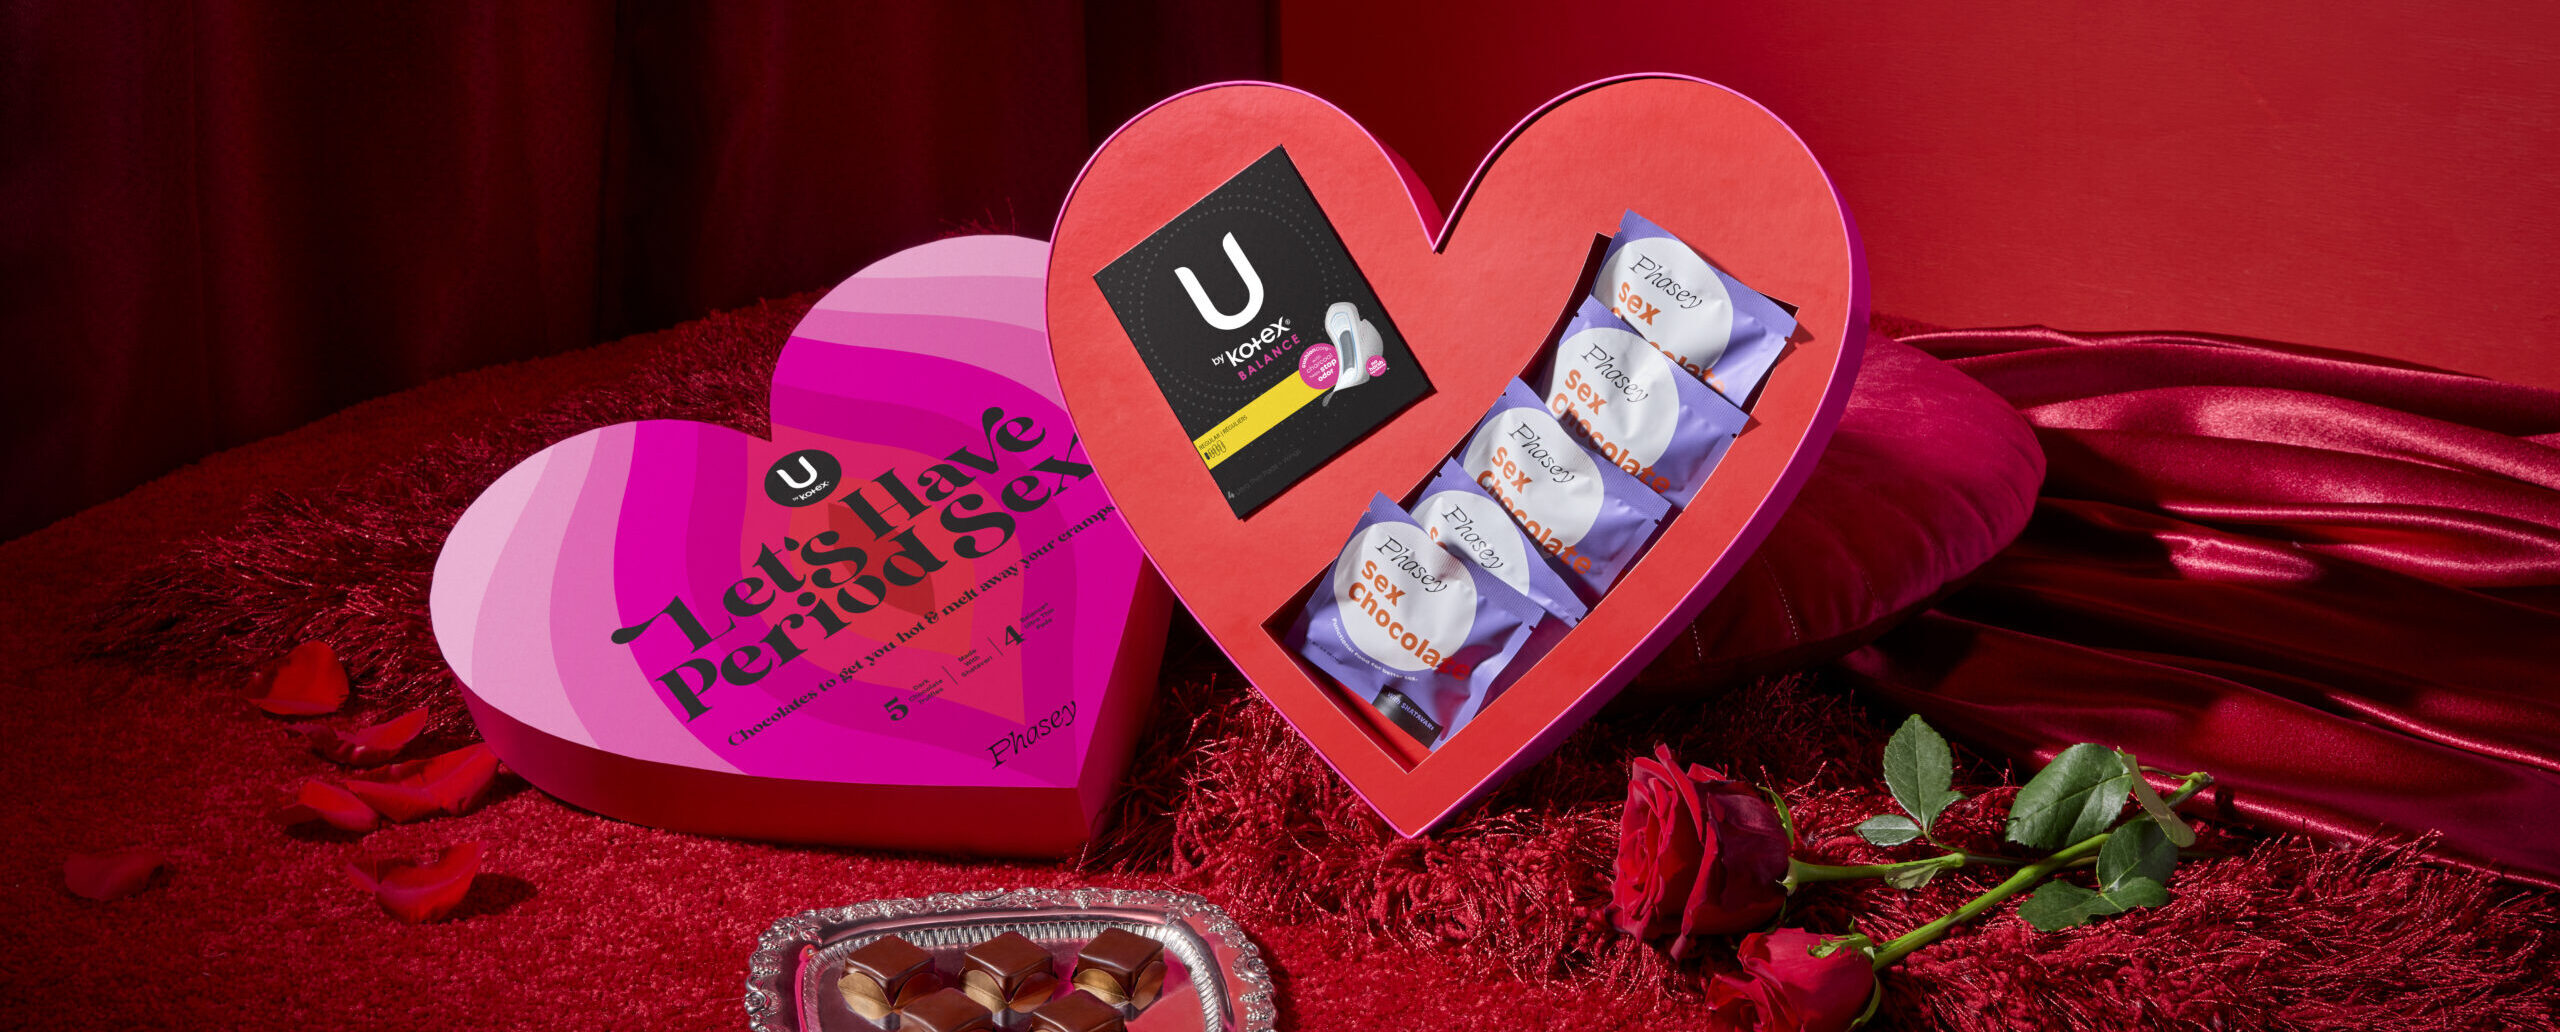 U by Kotex and Phasey Normalize Period Sex With Limited-Edition Box of Chocolates for Valentine’s Day